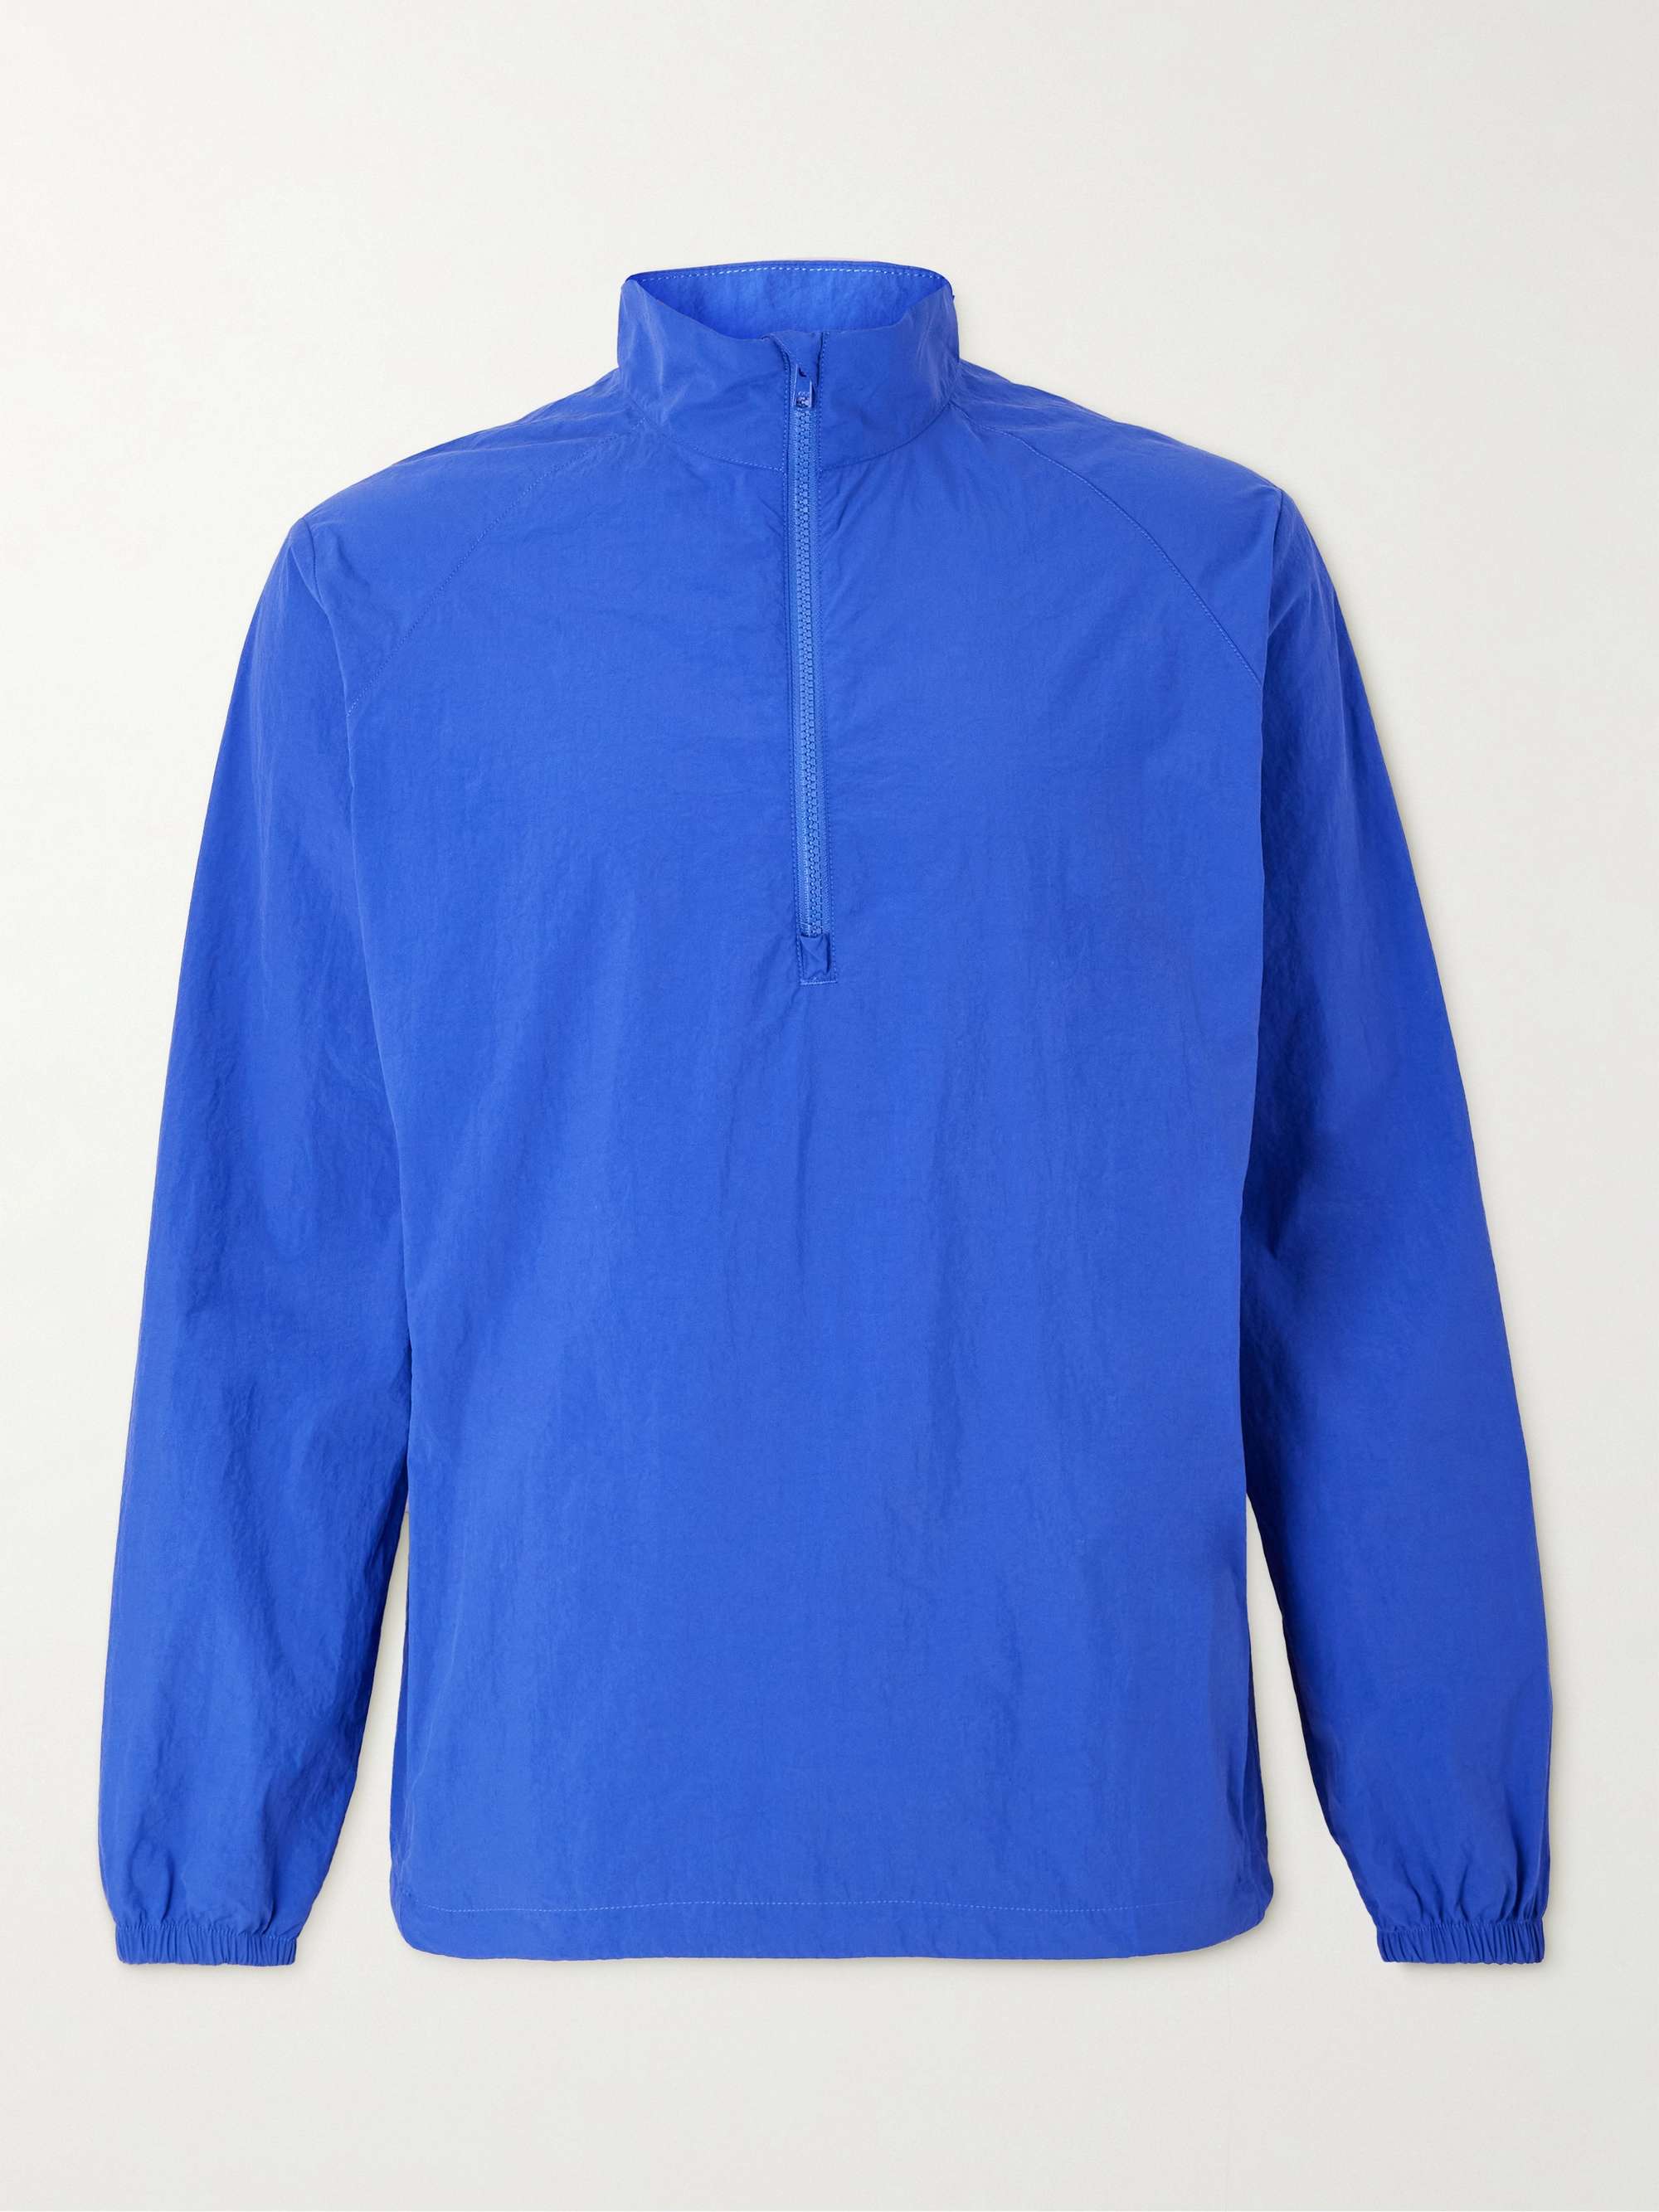 OUTDOOR VOICES A.M. Dawn Patrol Recycled-Shell Half-Zip Golf Jacket